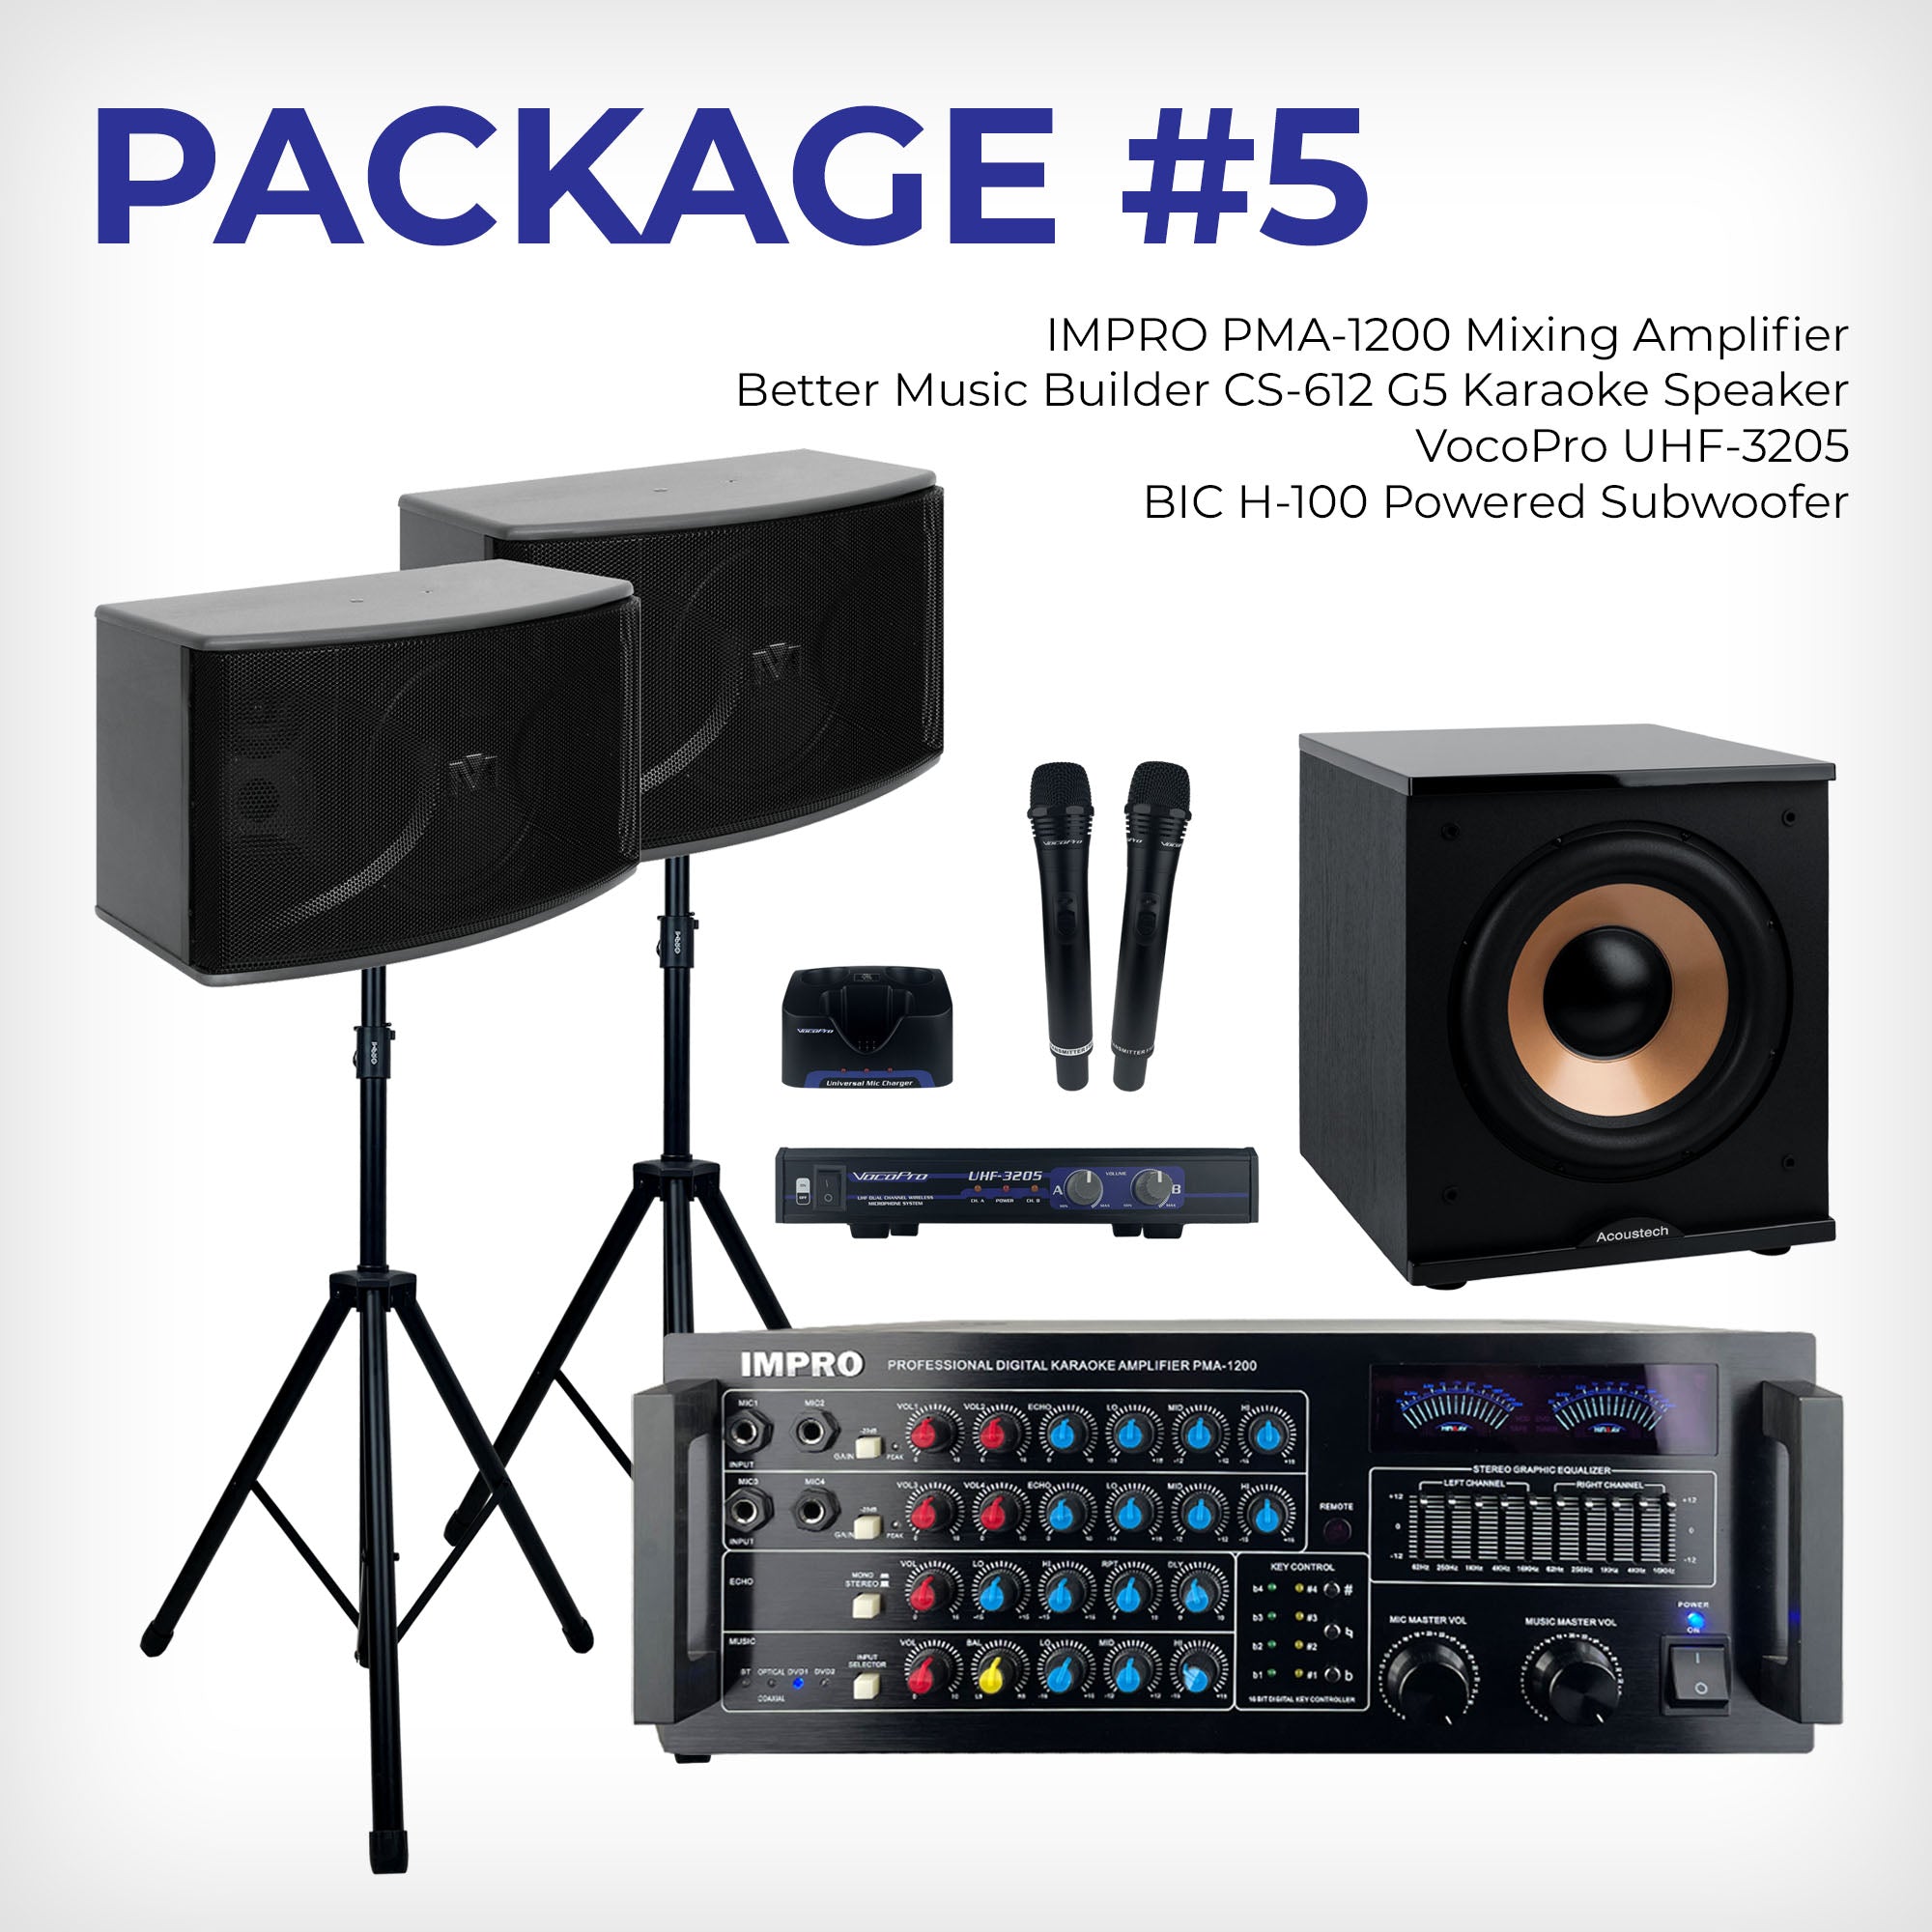 House Party Plus Pack #2: ImPro Amp, BetterMusicBuilder Speakers, Stands, VocoPro Mics & BIC Subwoofer